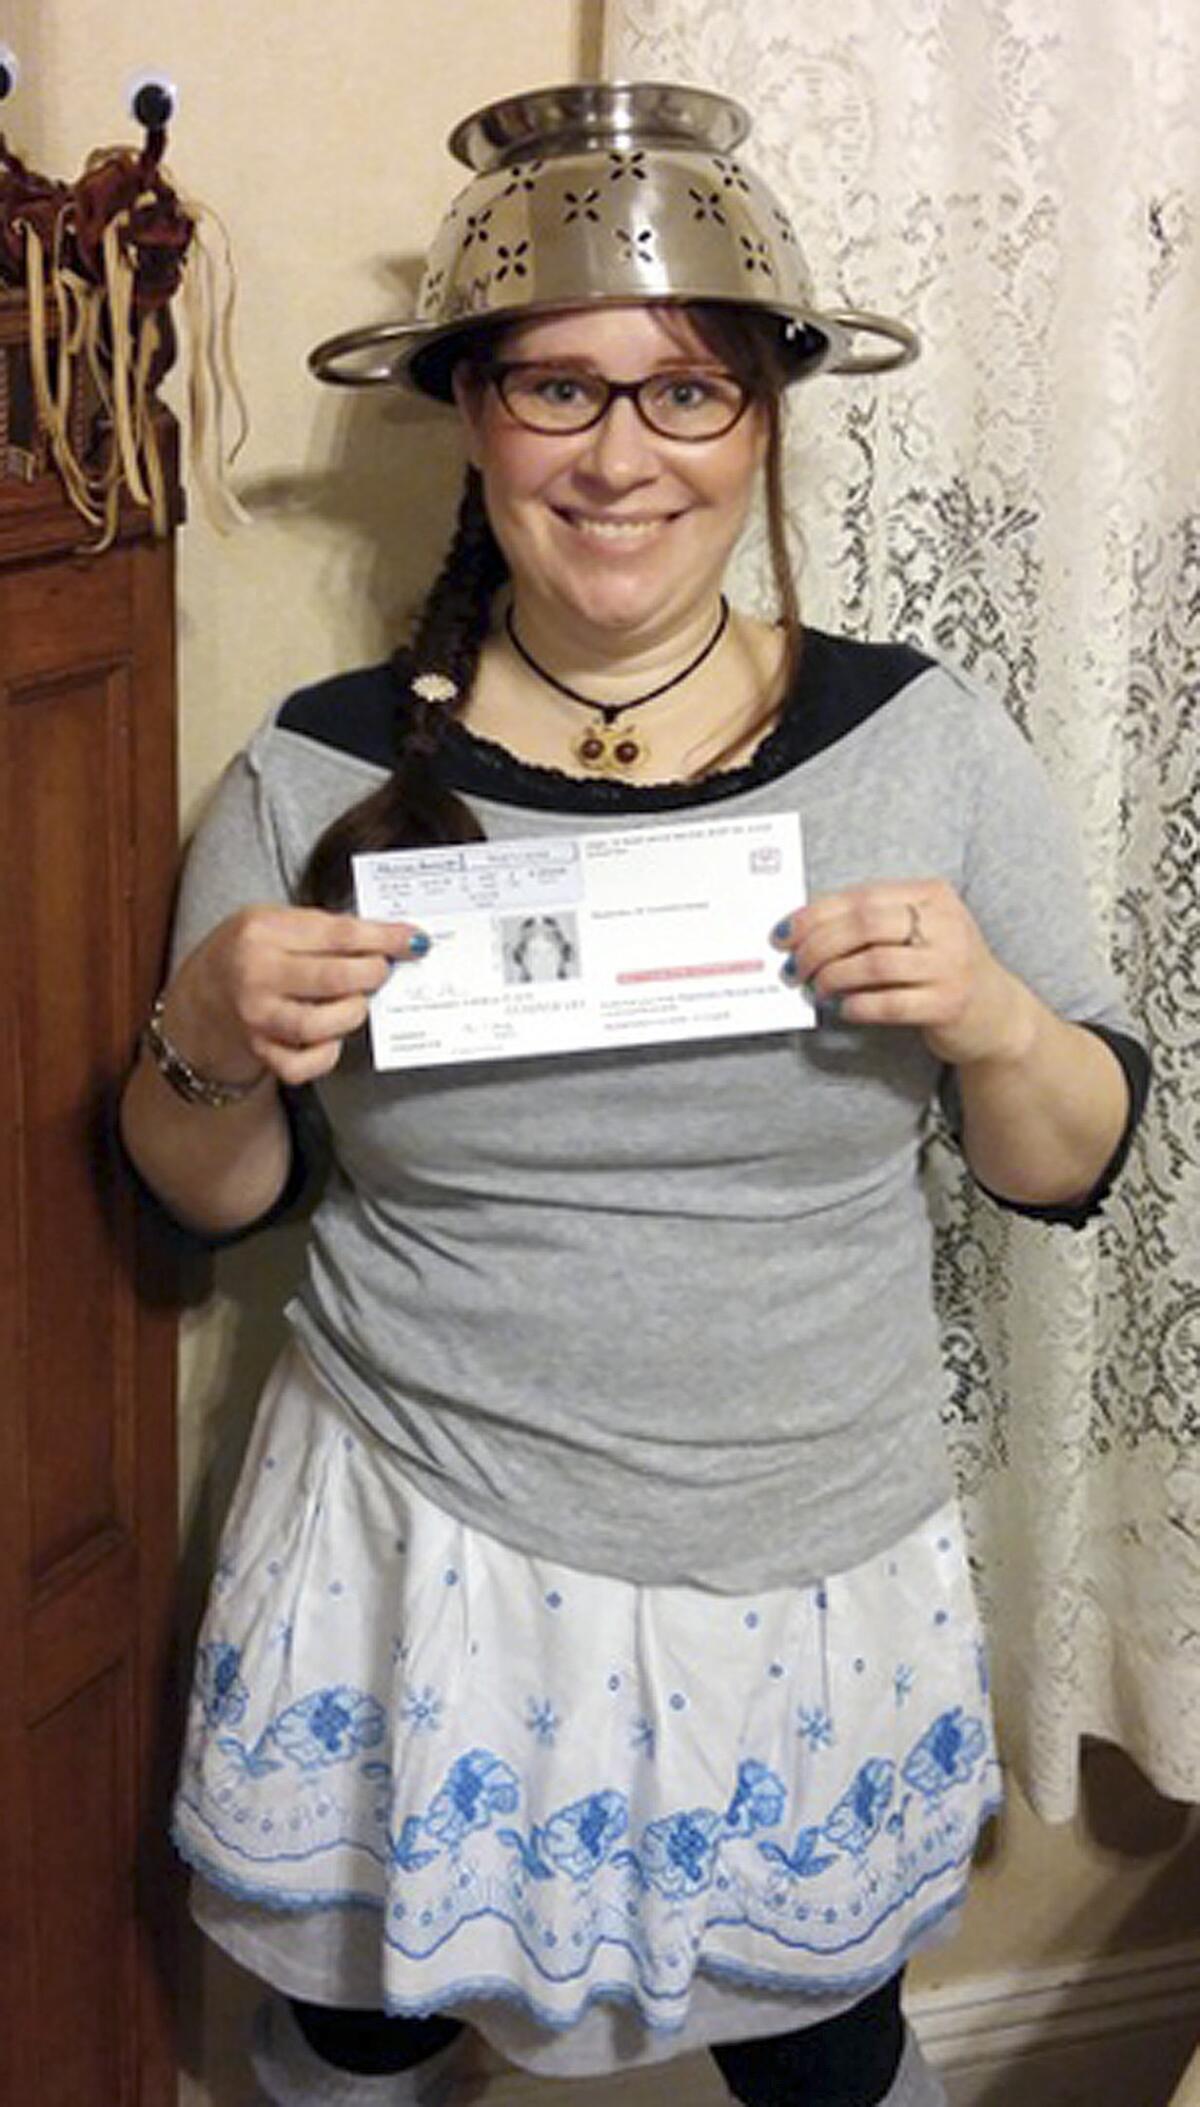 Lindsay Miller of Lowell, Mass. won the right to wear a colander on her head for her driver's license photo. Miller is a practicing Pastafarian, largely viewed as a satirical religion that worships the Flying Spaghetti Monster.